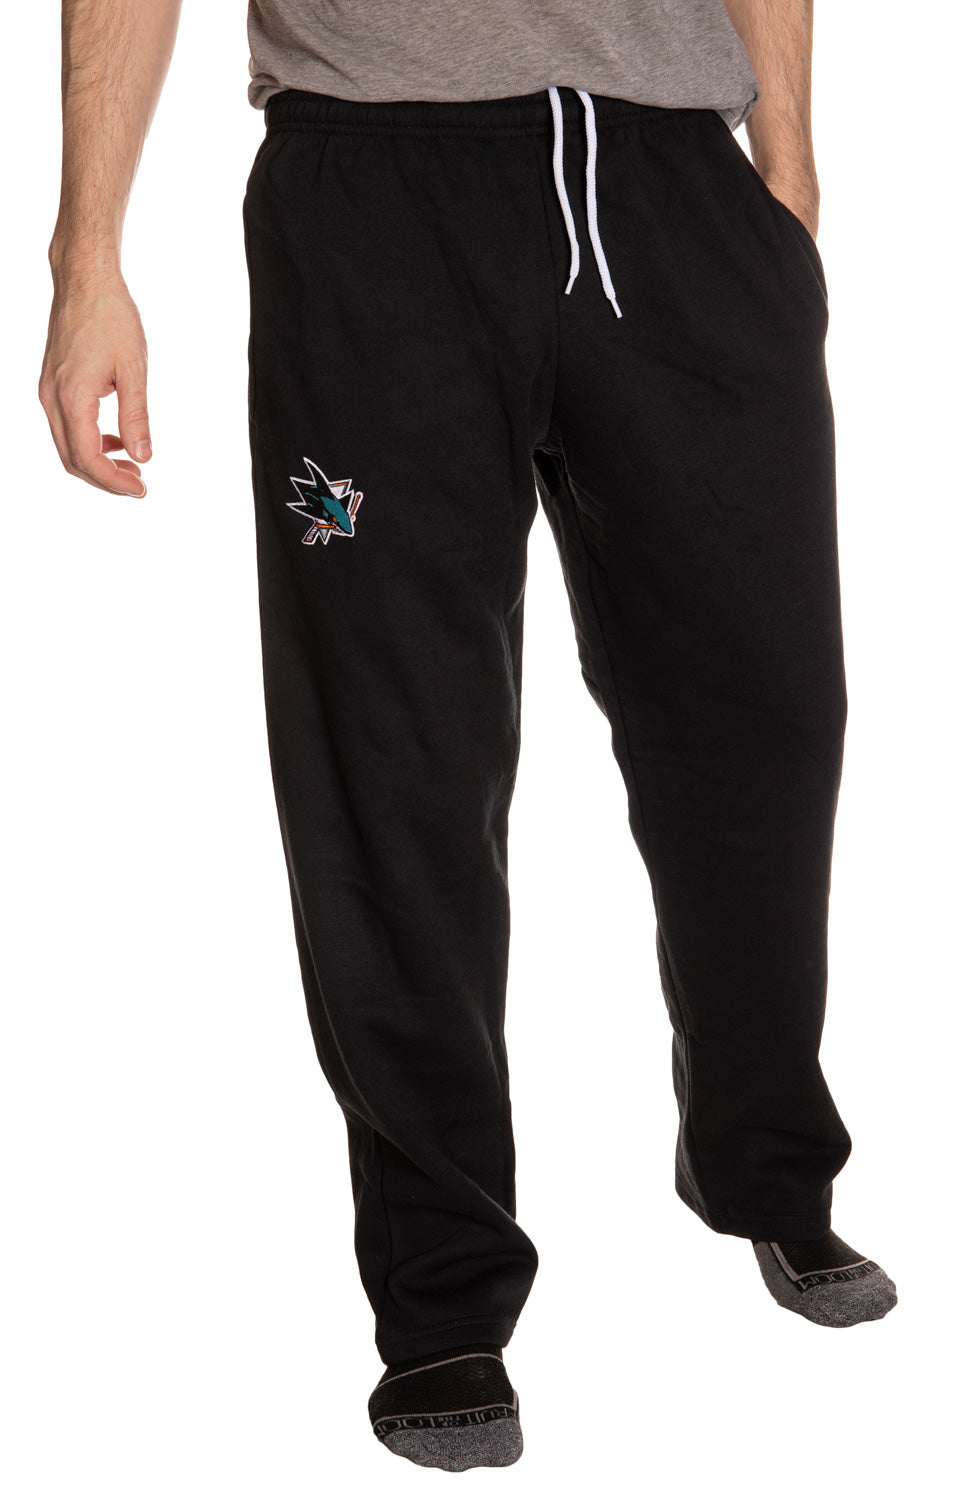 San Jose Sharks Embroidered Logo Sweatpants Front VIew